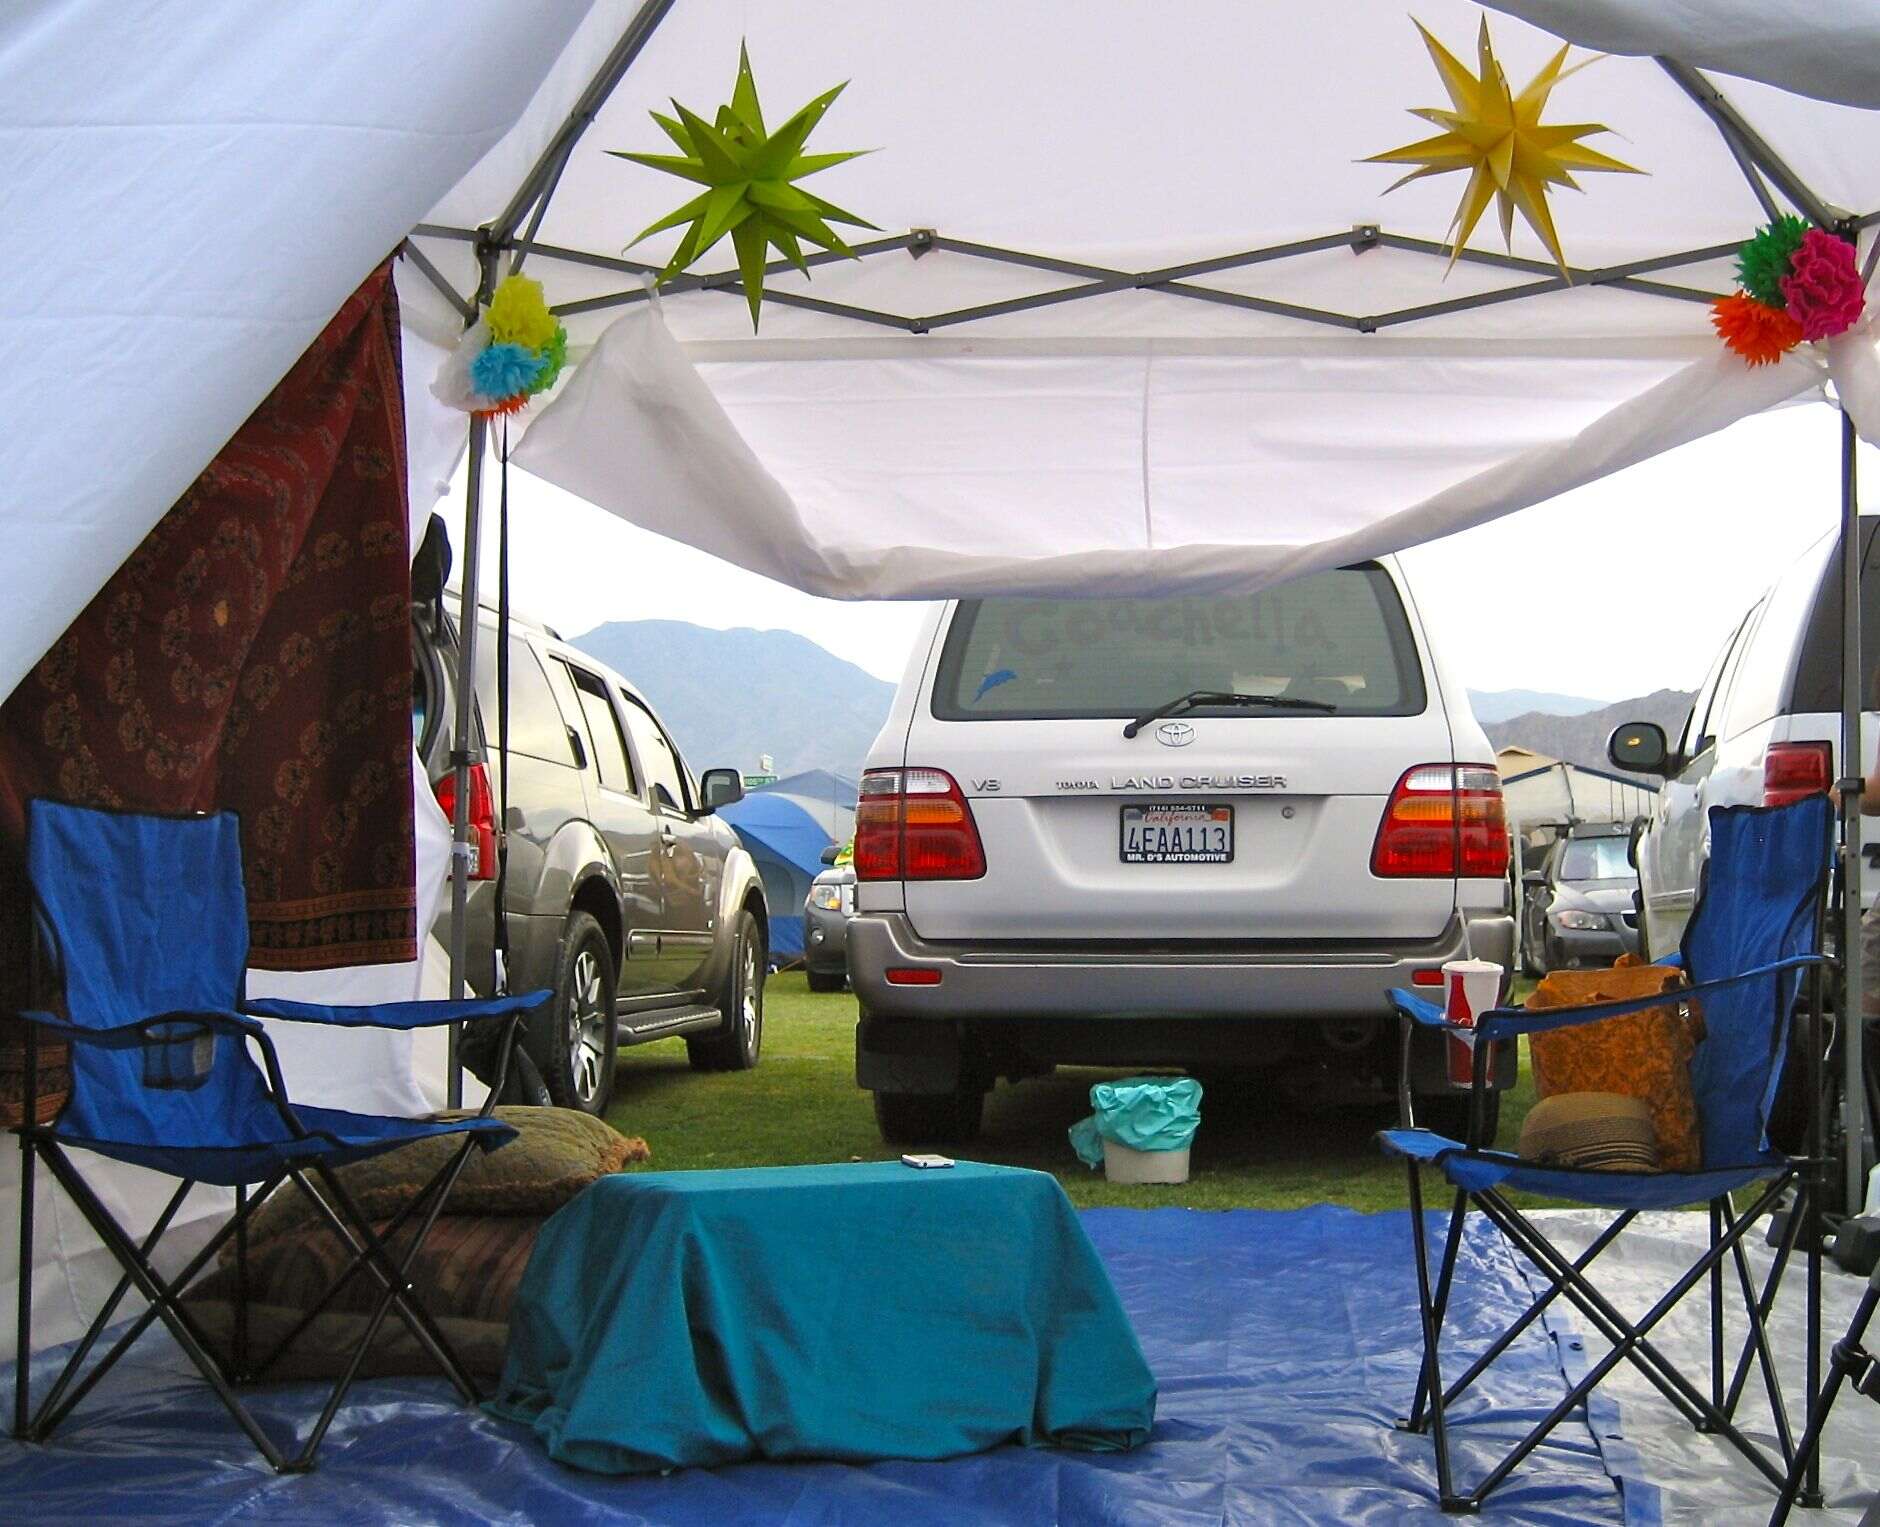 Coachella Car Camping: Best Tips to Rock the Festival